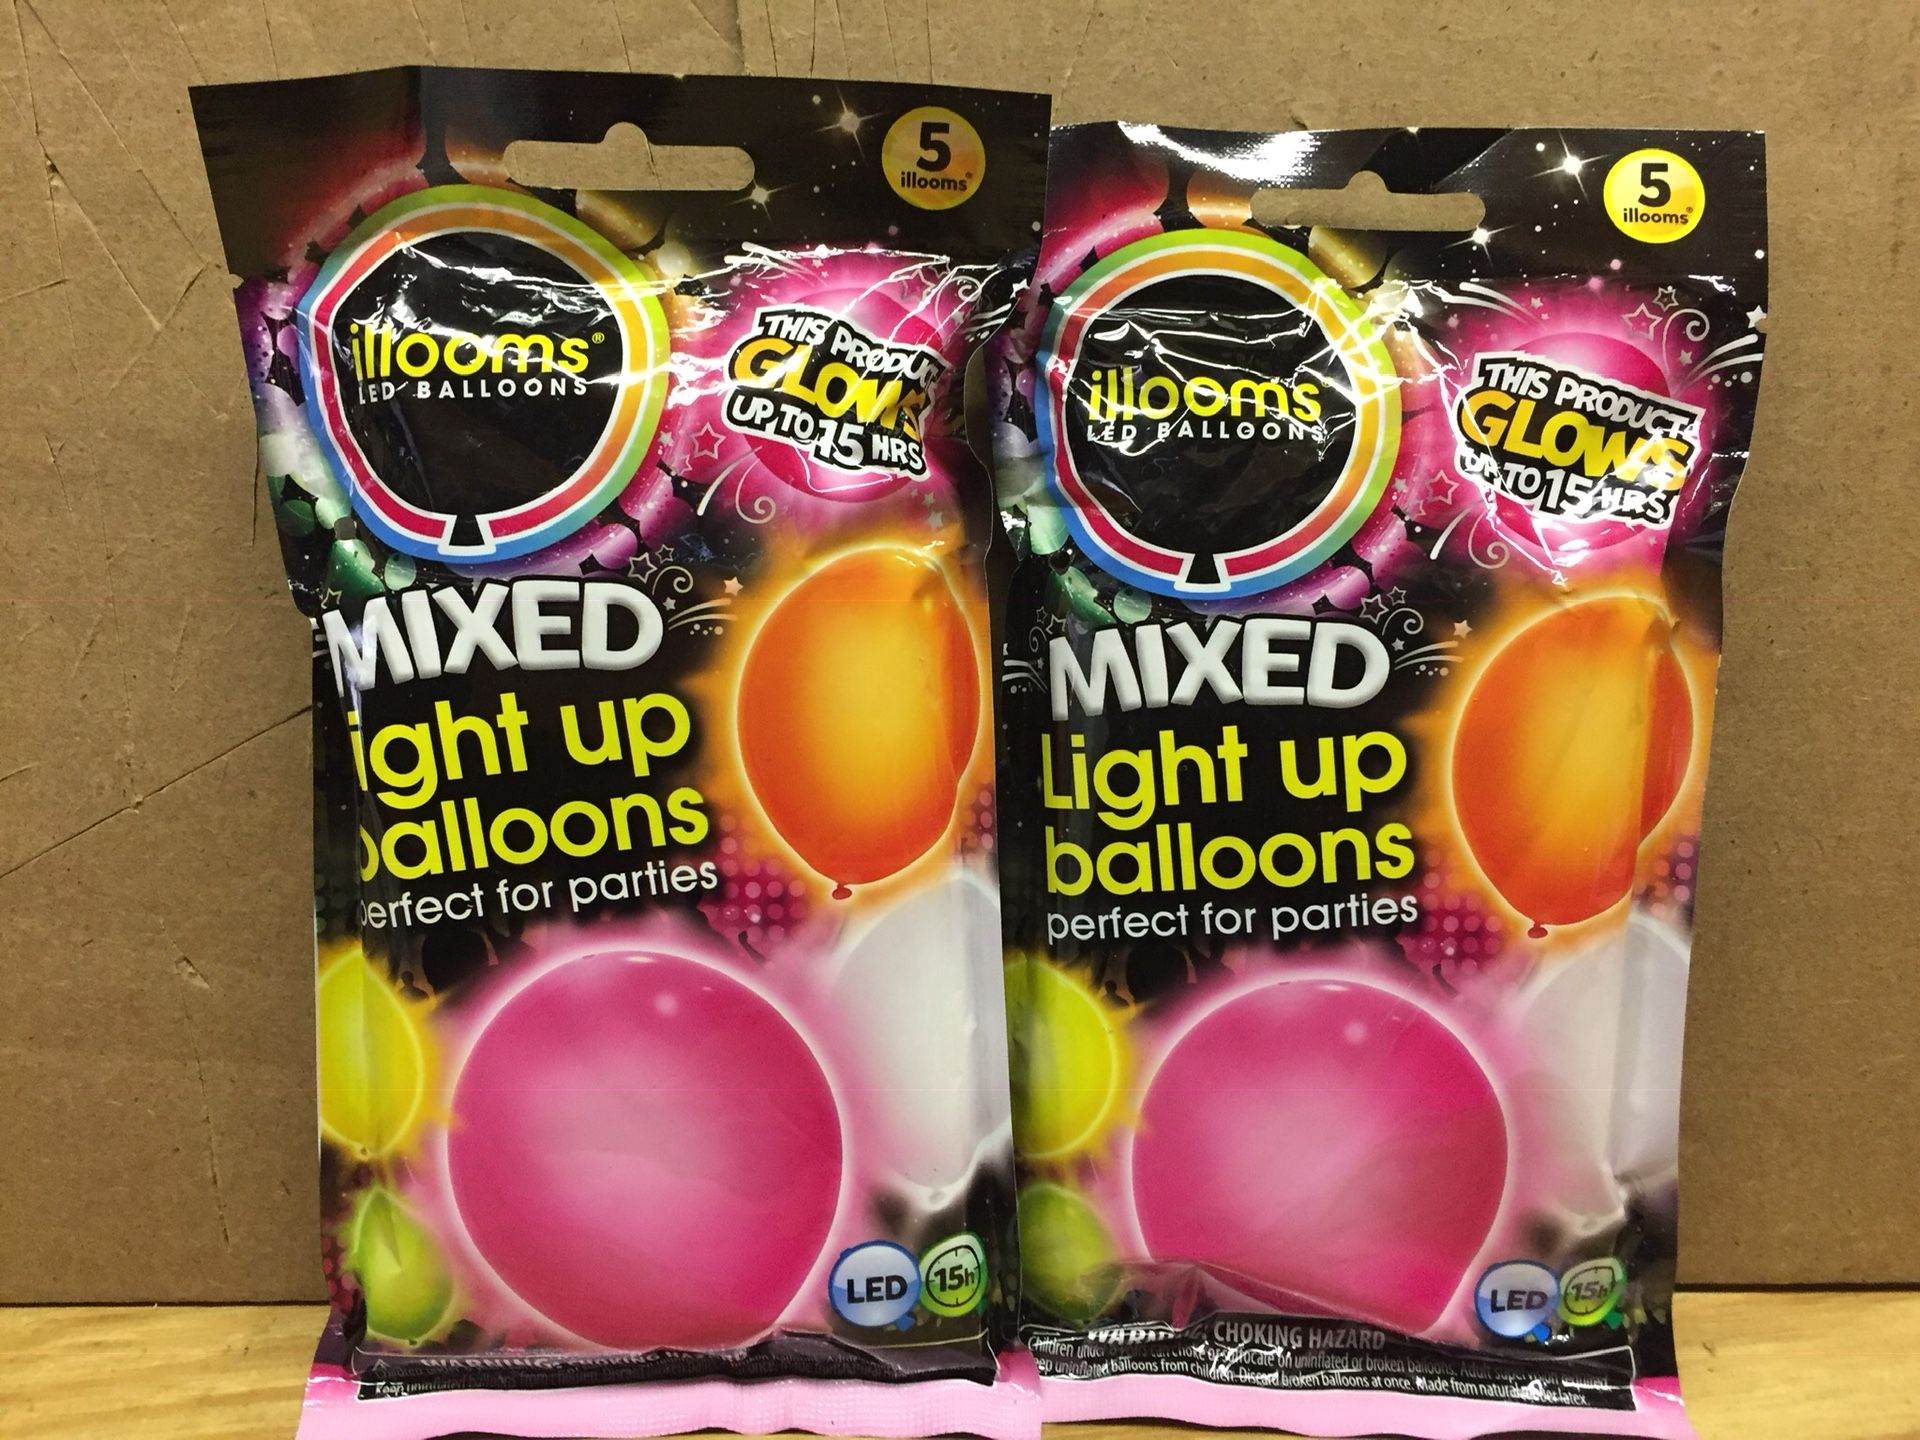 Light up balloons or light up balloons punch